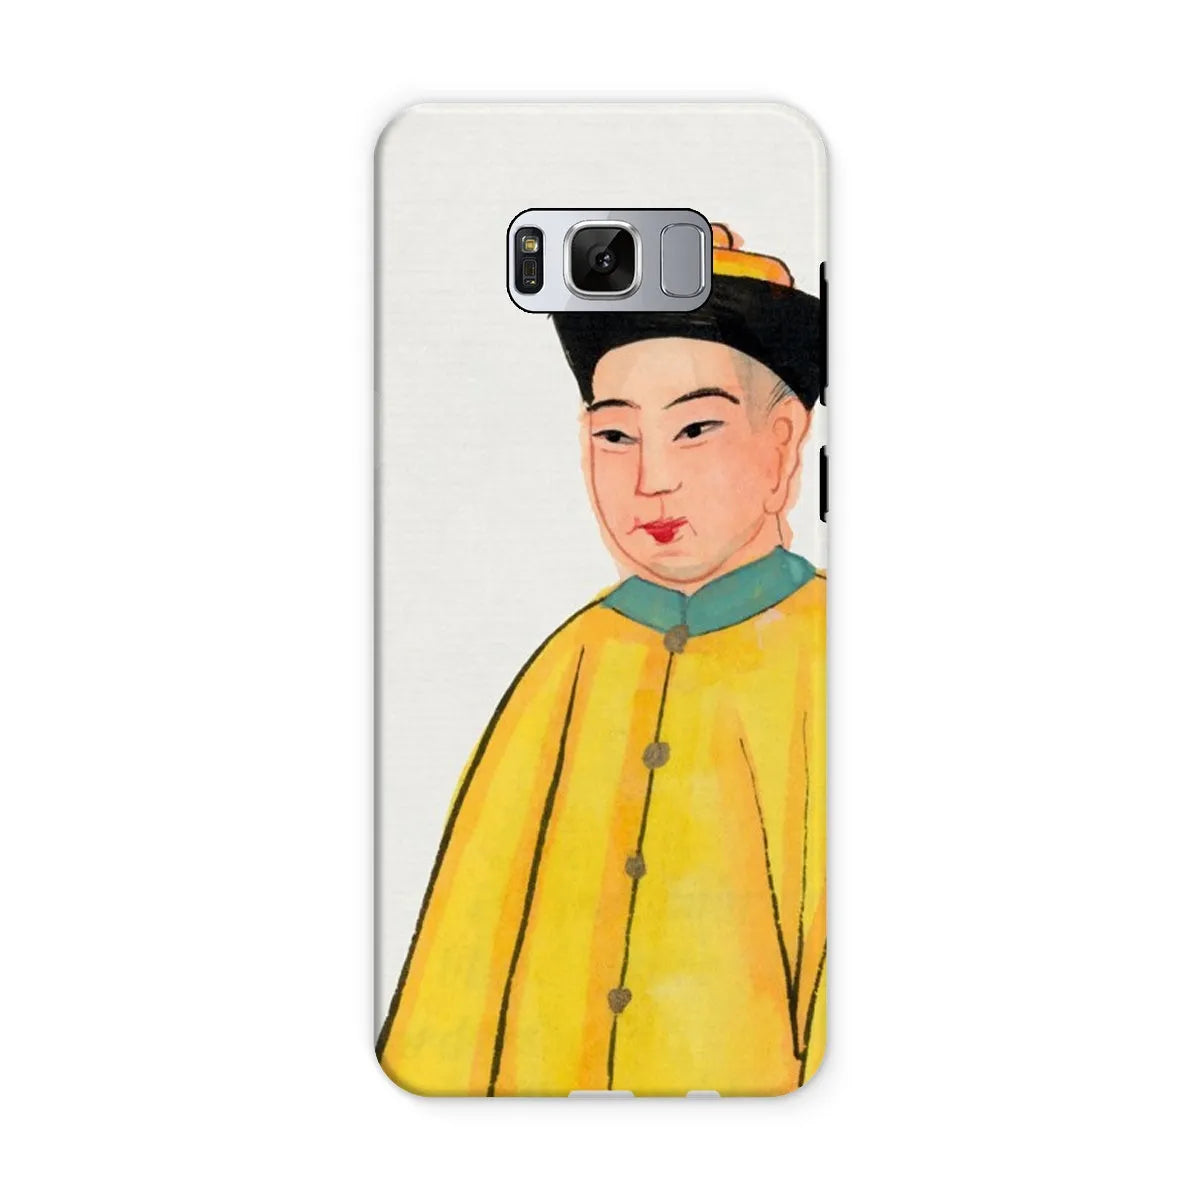 Priest In Yellow Robes - Chinese Aesthetic Art Phone Case - Samsung Galaxy S8 / Matte - Mobile Phone Cases - Aesthetic